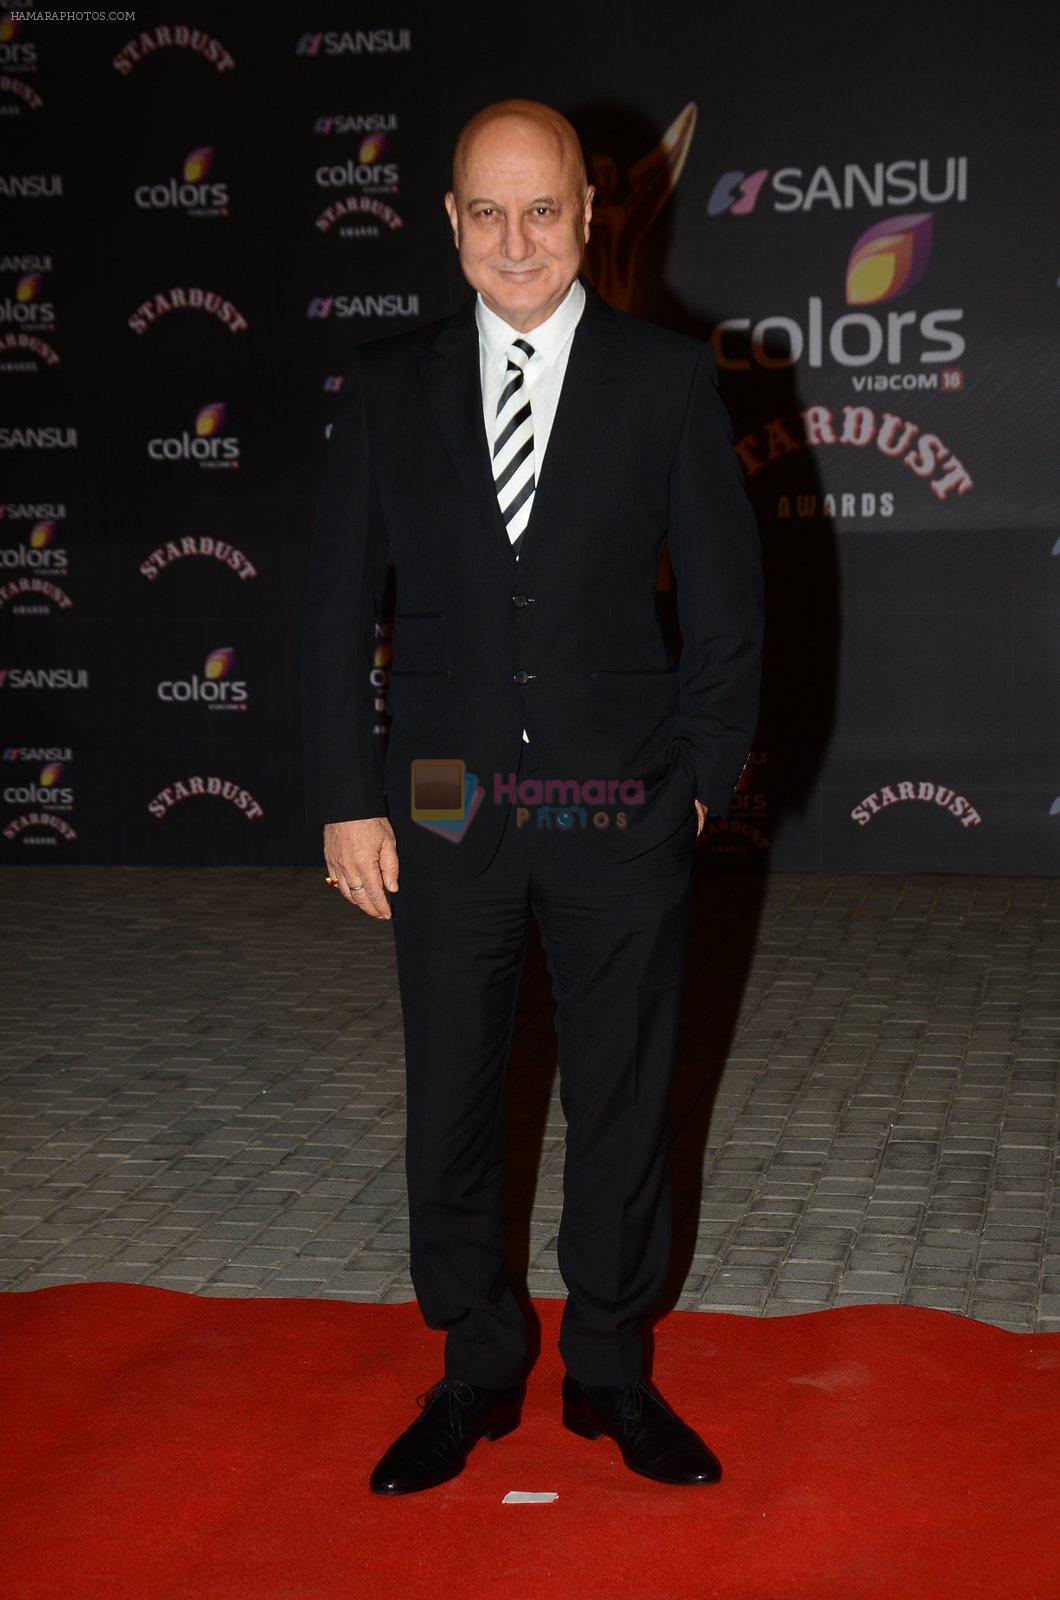 Anupam Kher at the red carpet of Stardust awards on 21st Dec 2015